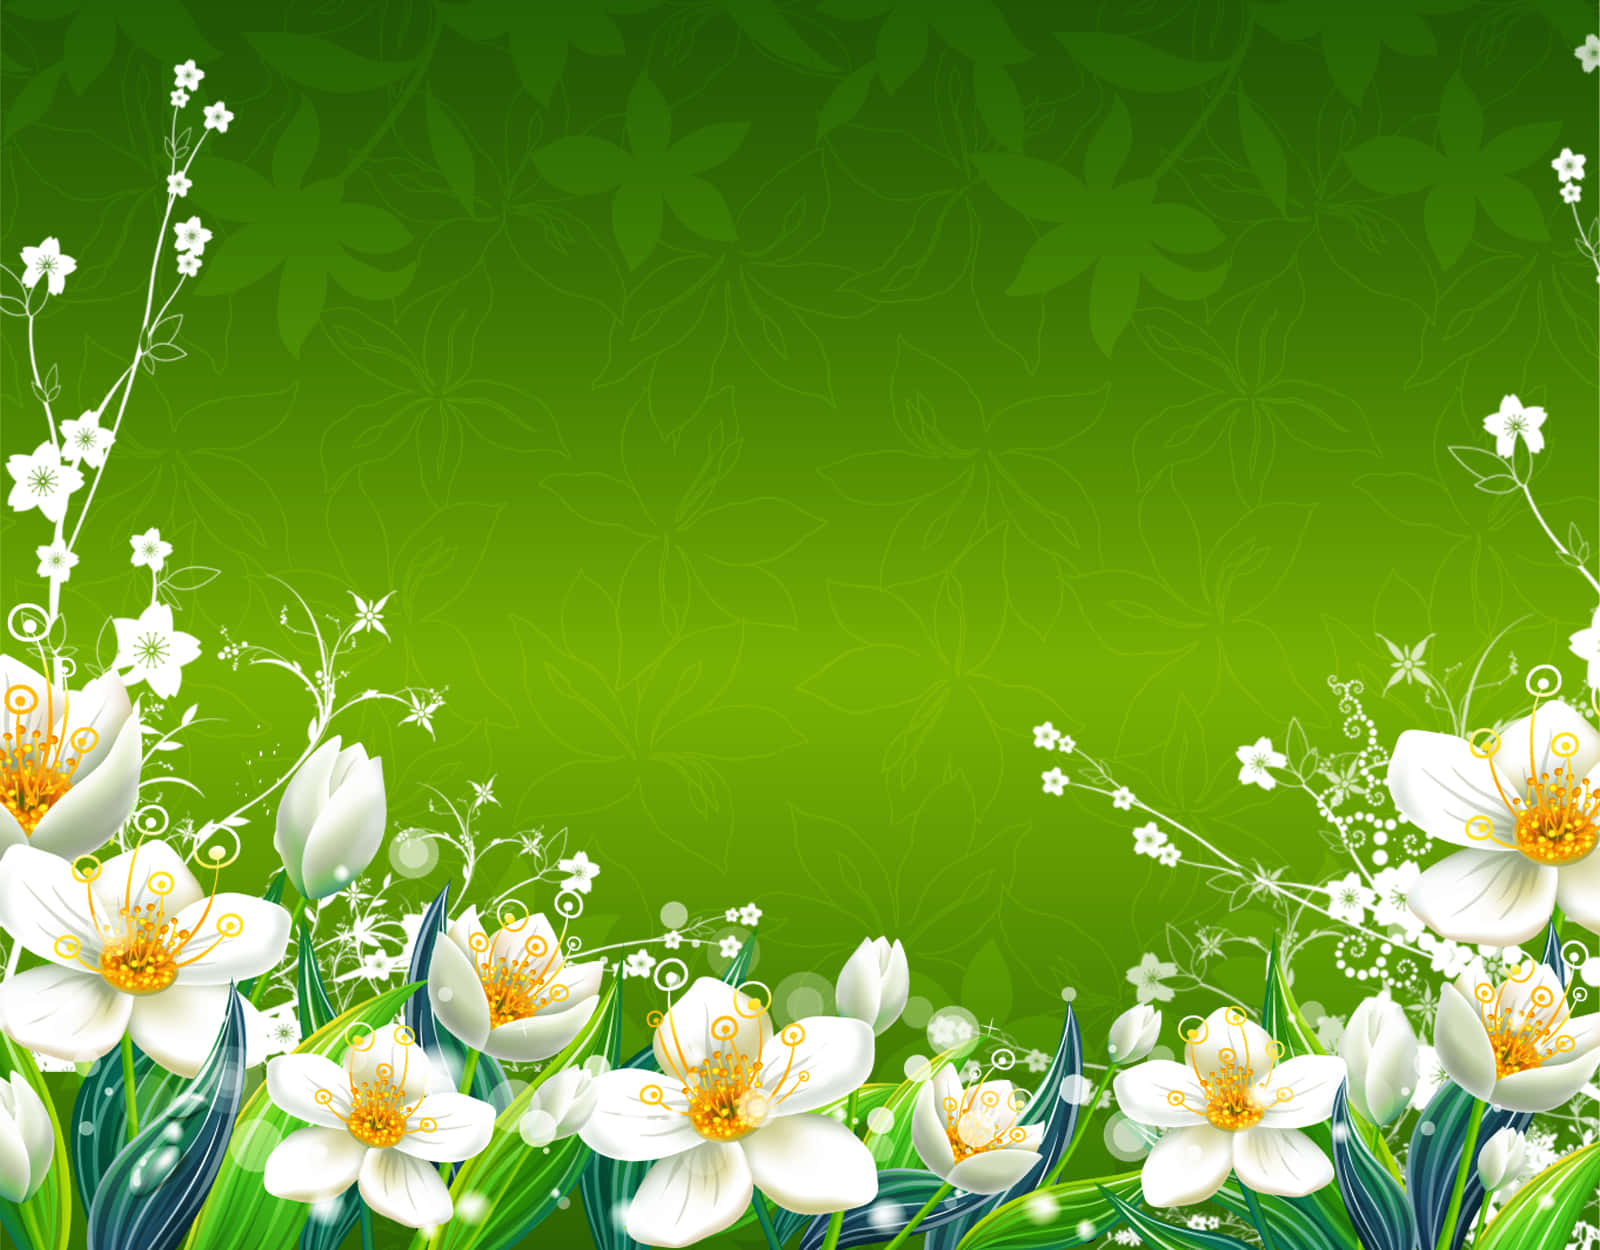 100+] Green Floral Backgrounds